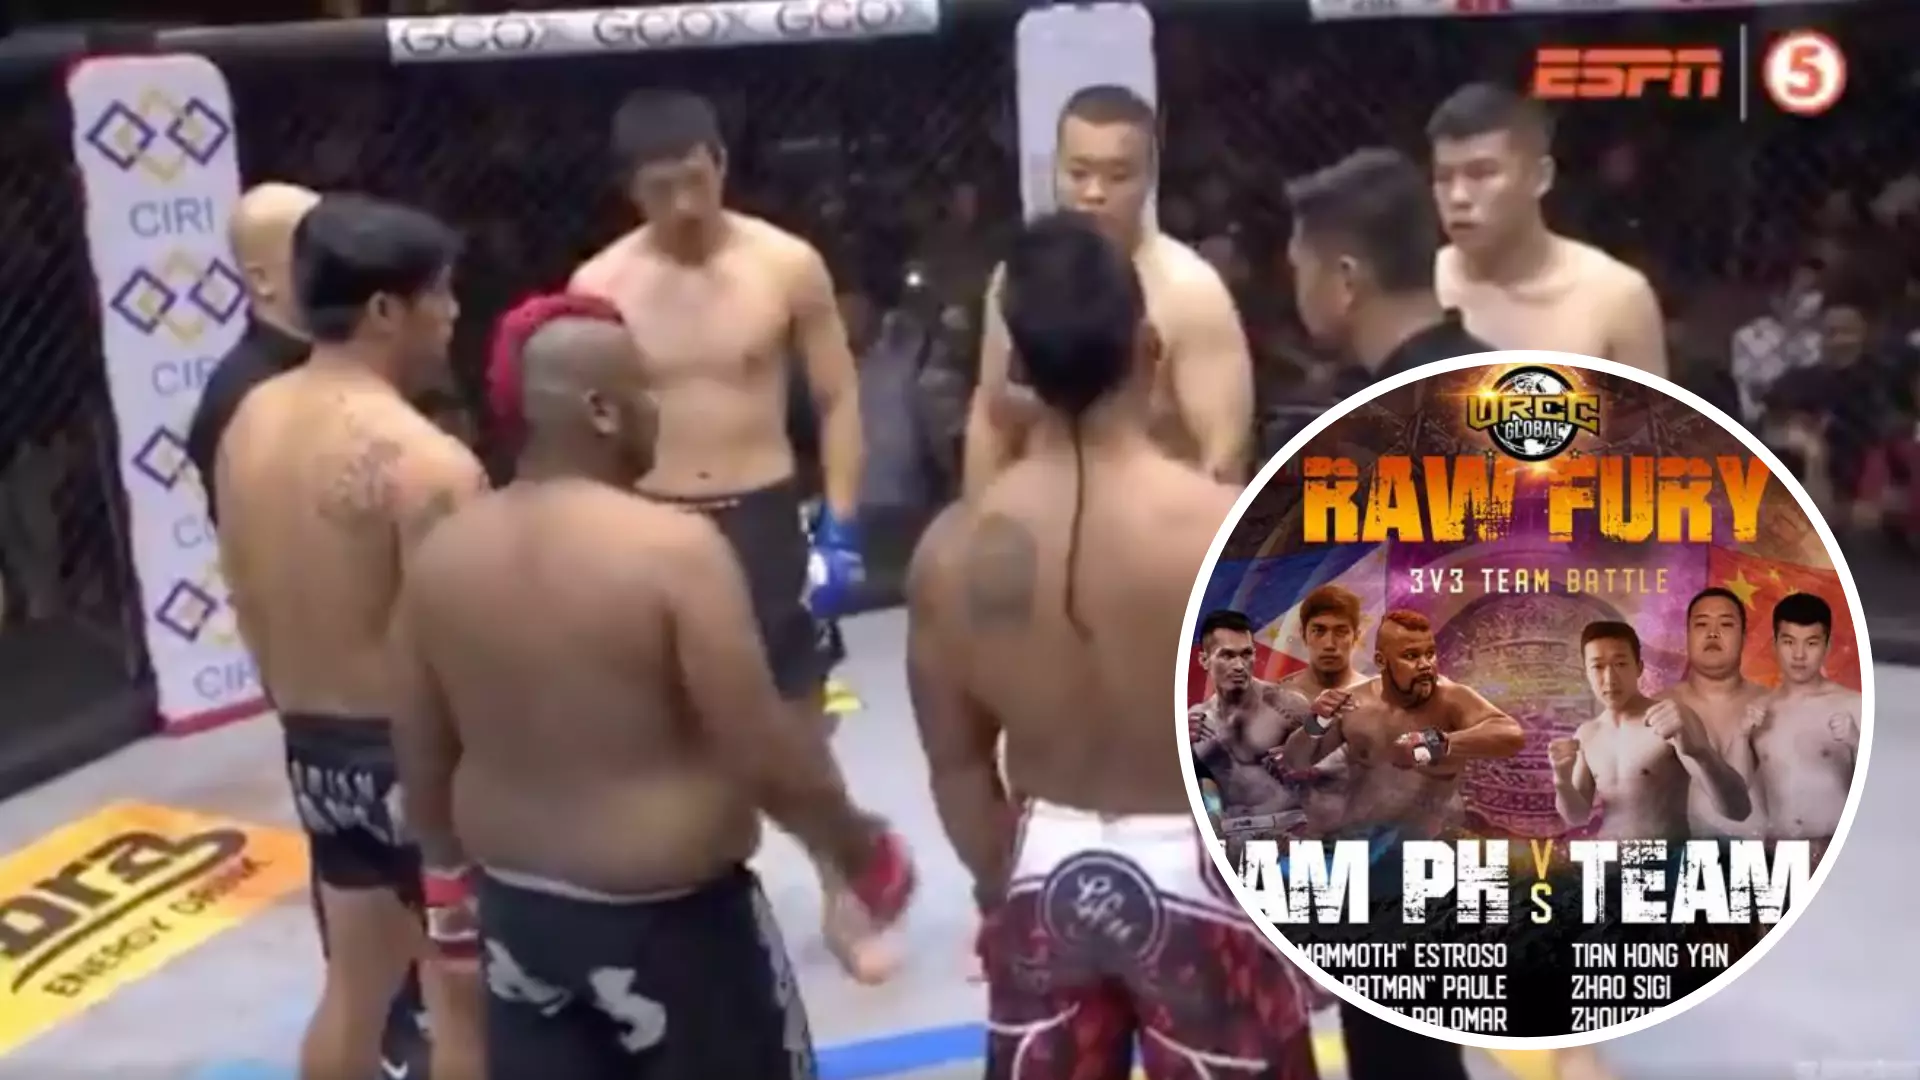 Team Philippines Vs Team China In A 3-Vs-3 MMA Fight Is Pure Chaos